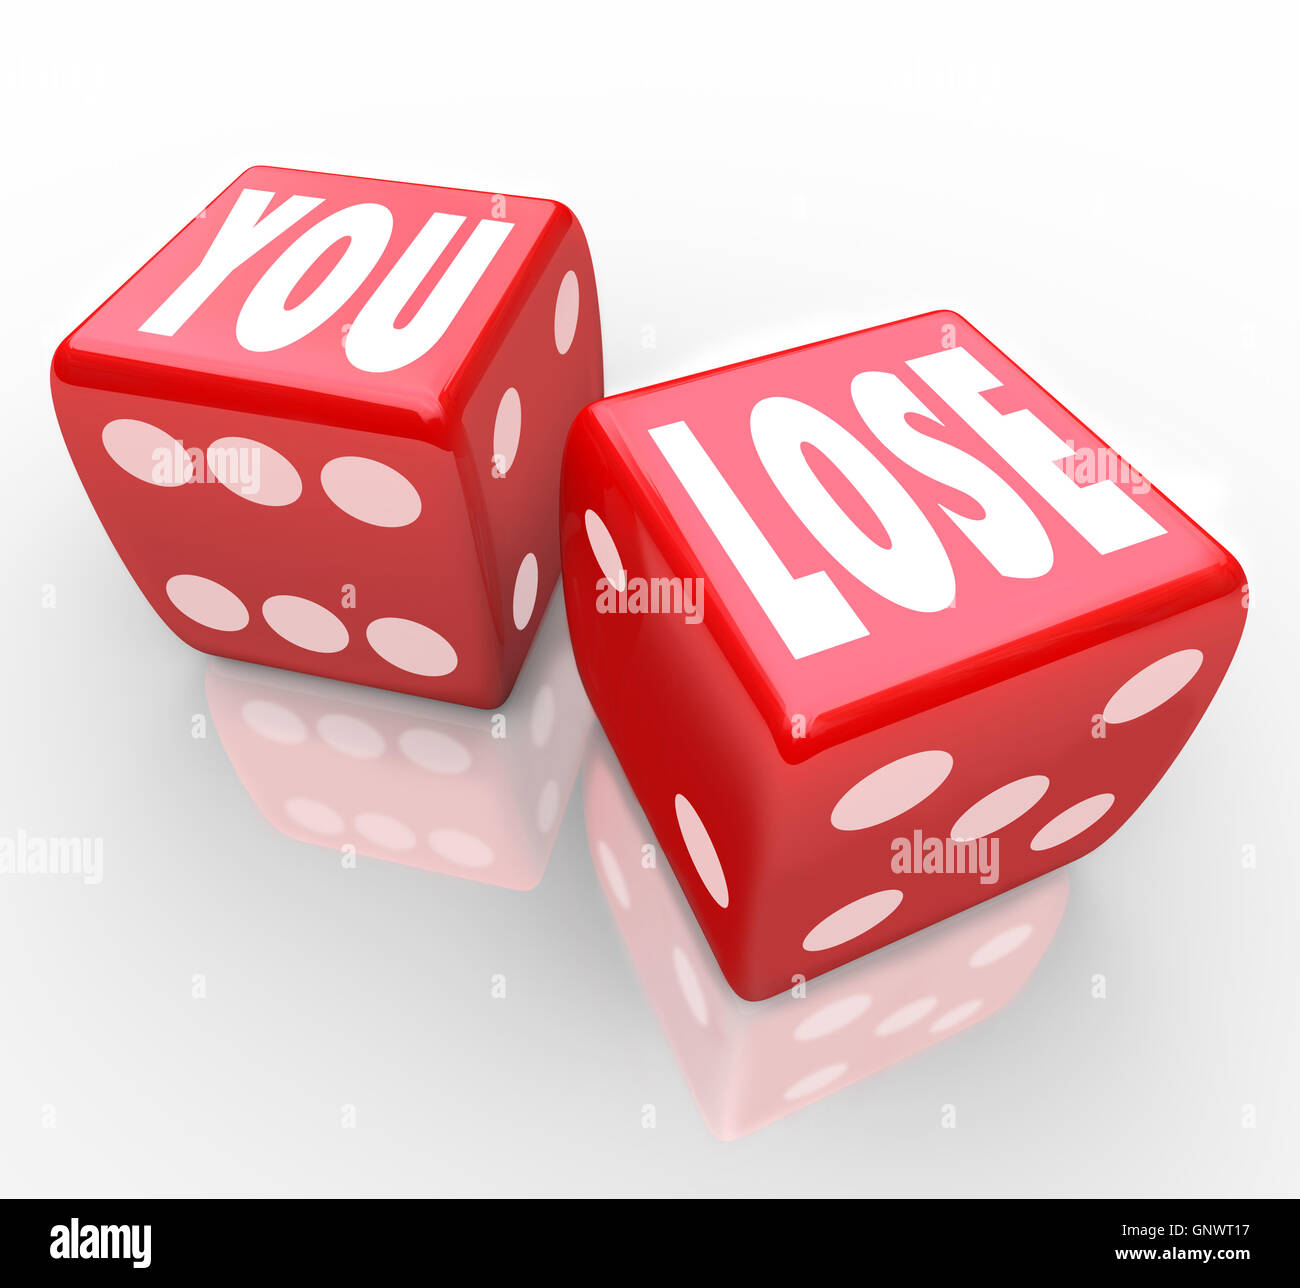 You Lose Words on Two Red Dice Failure Stock Photo